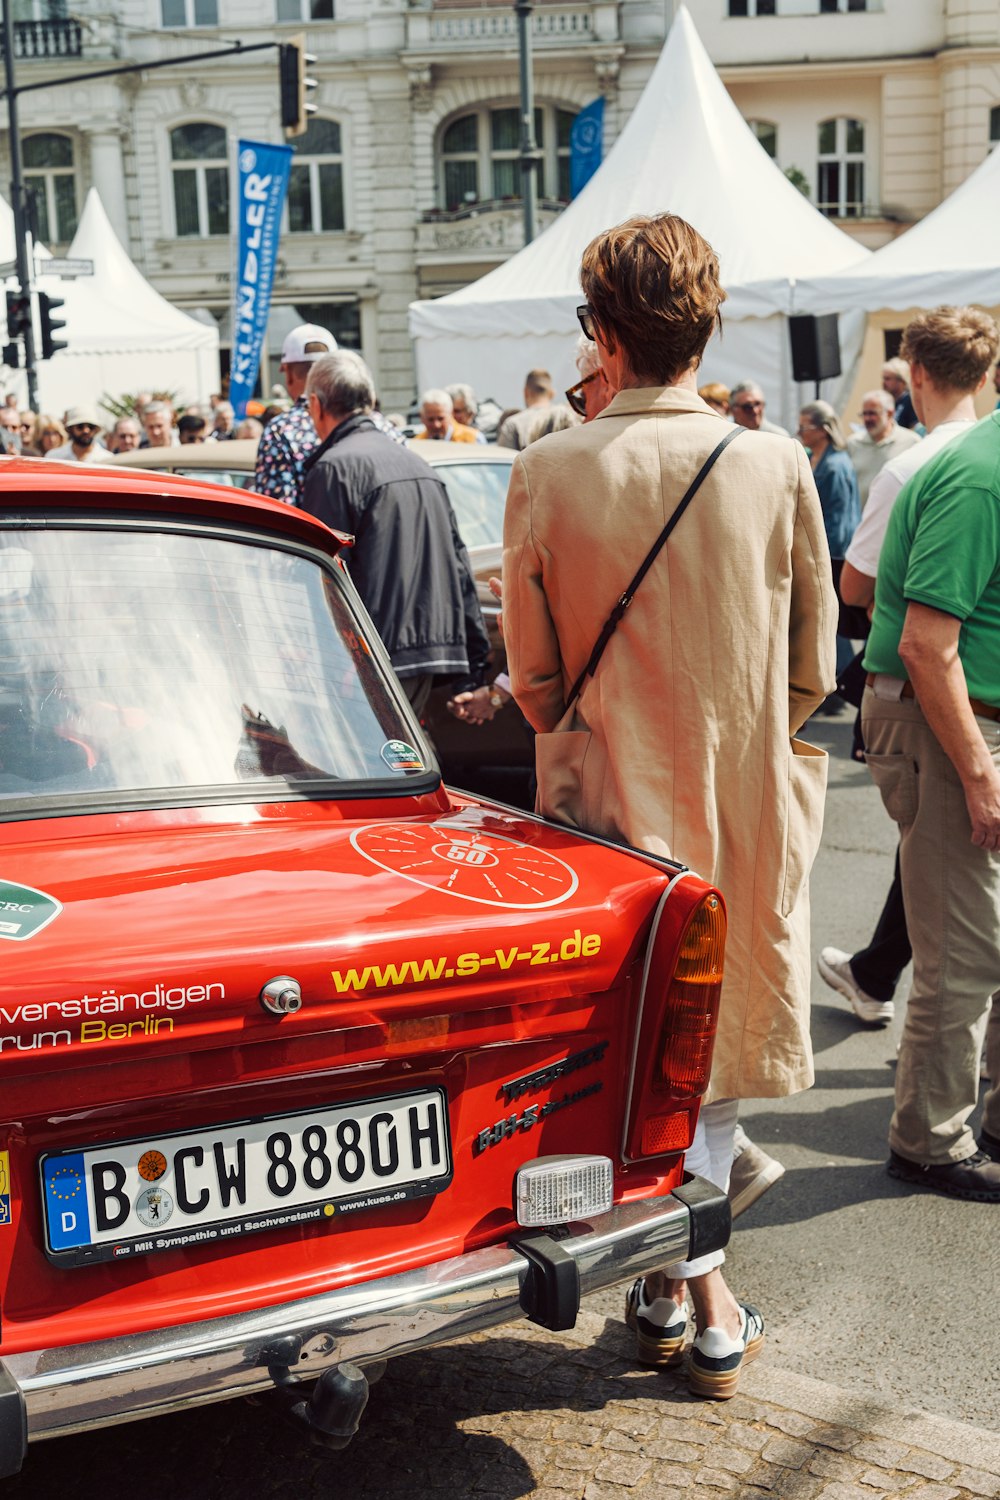 a red car parked in front of a crowd of people